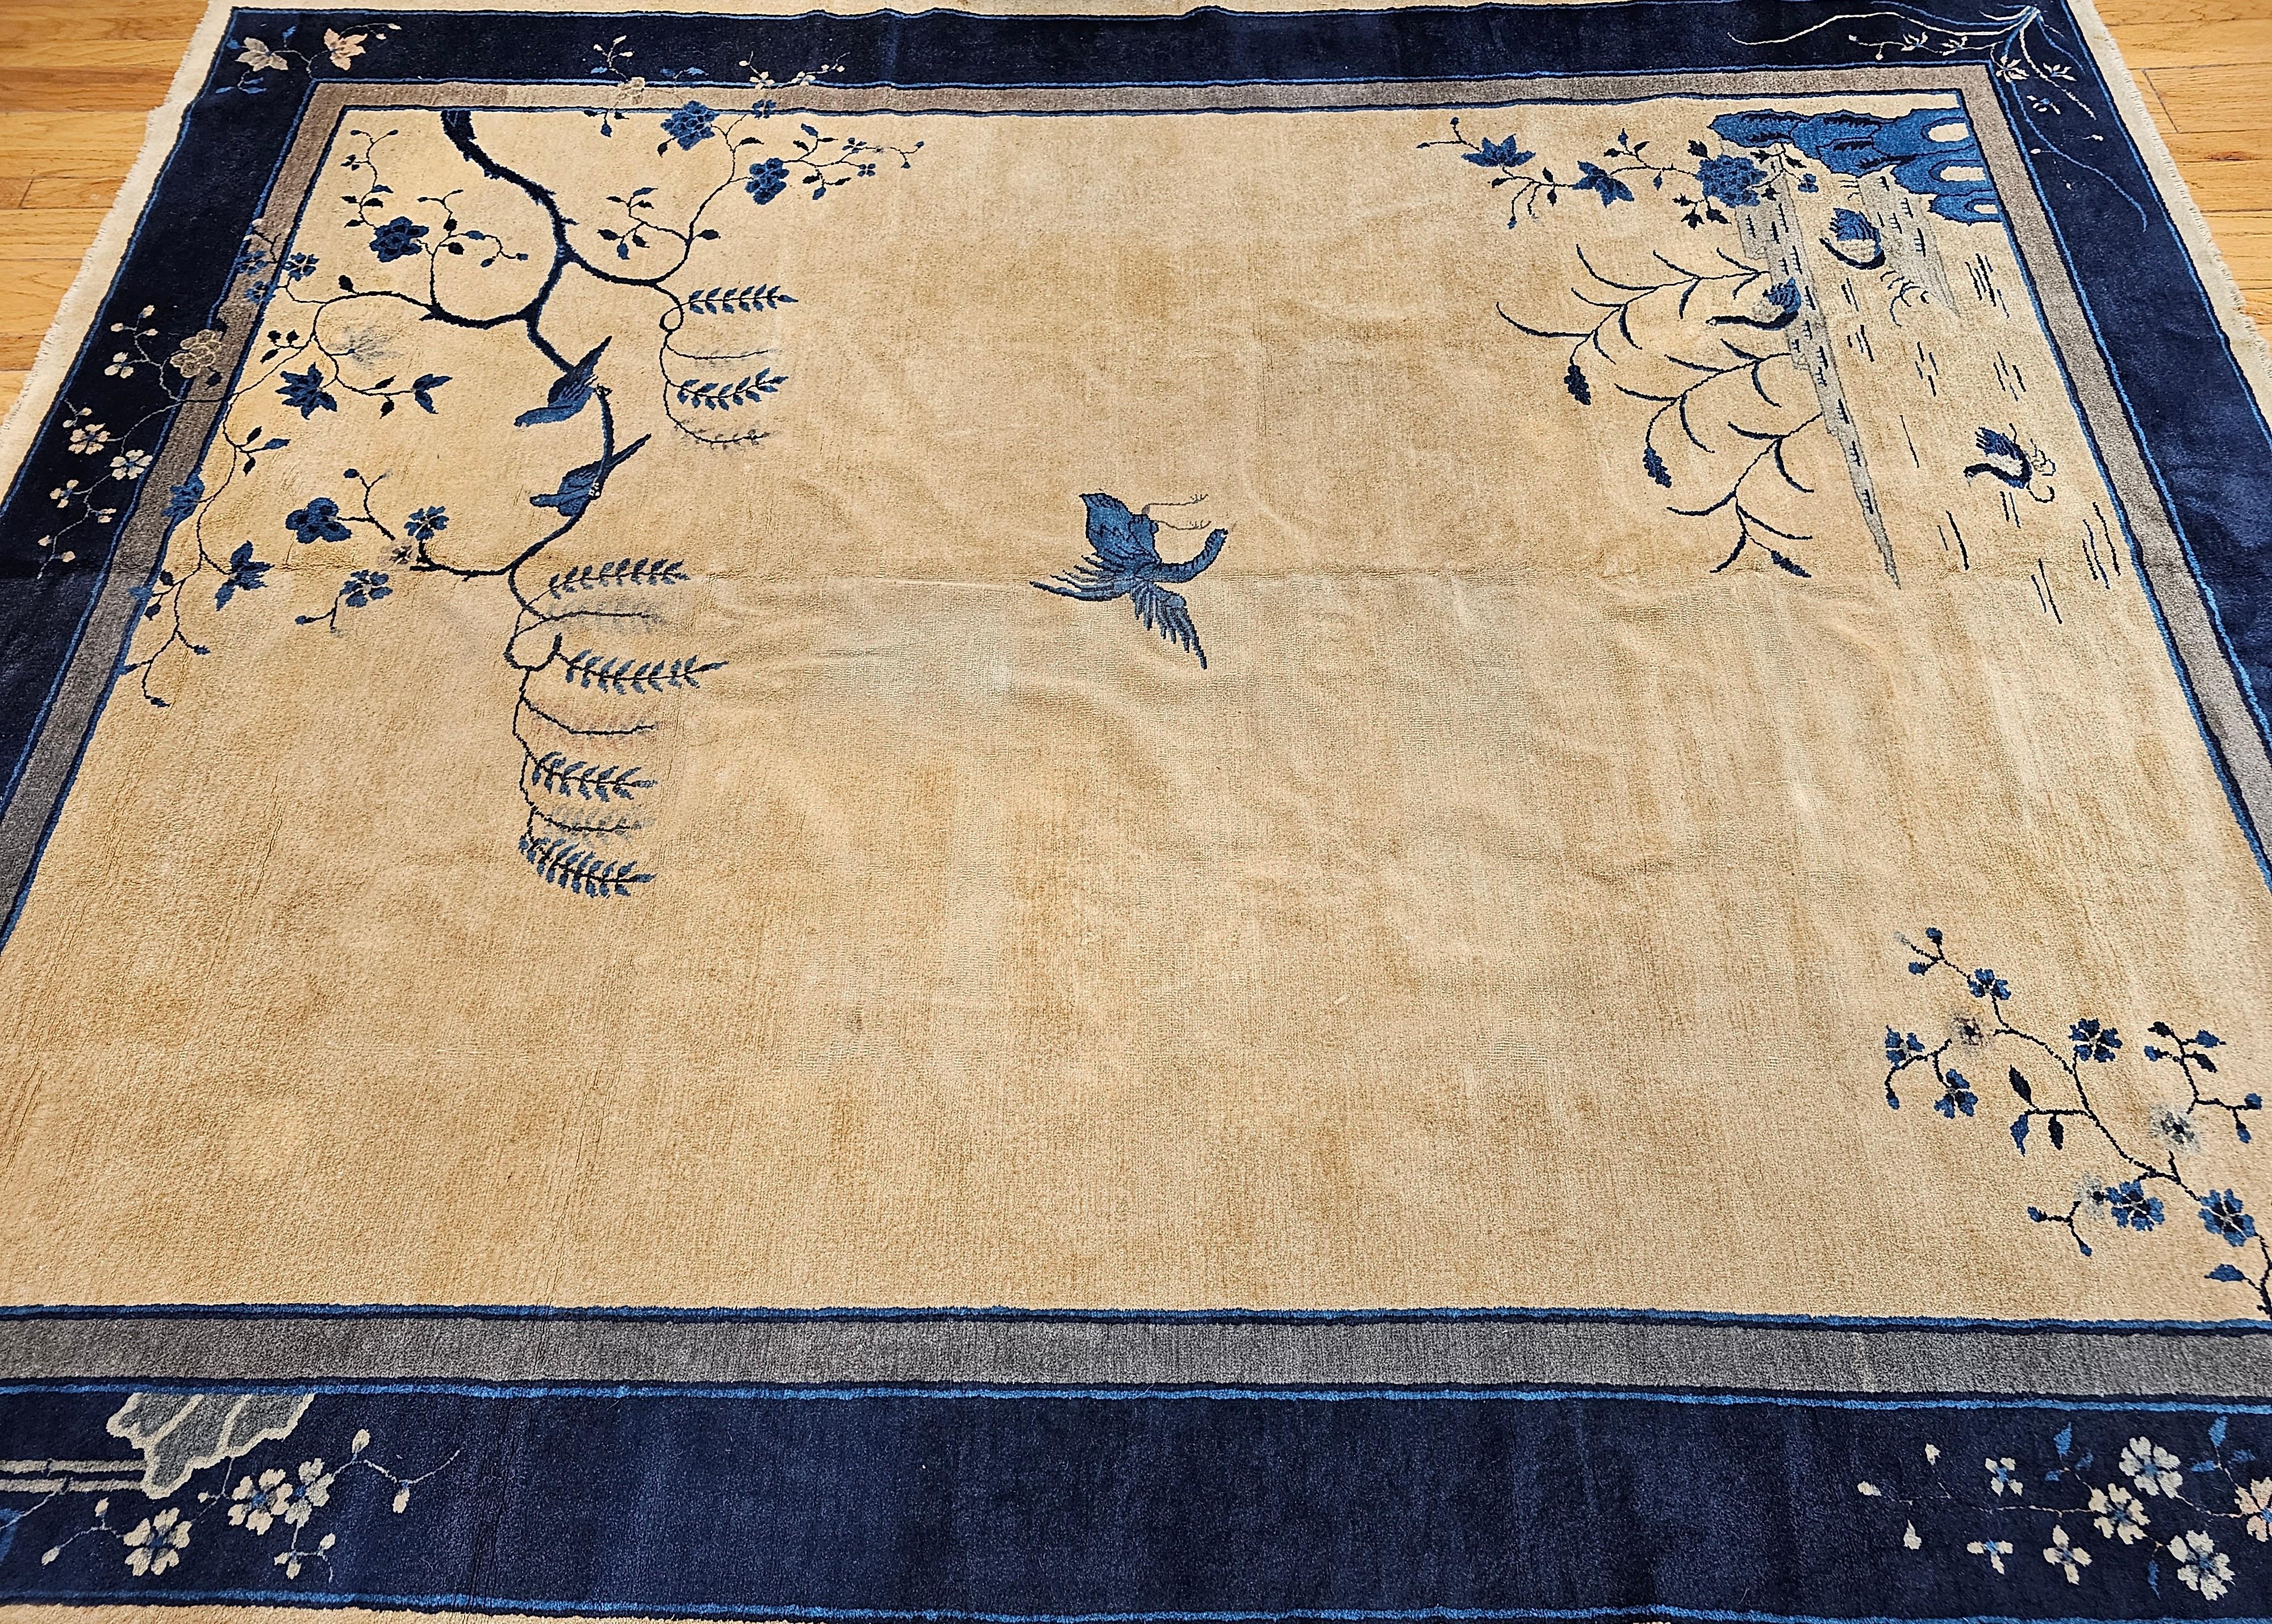 Vintage Art Deco Chinese Rug with Cranes, Pagoda, Mountains in Wheat, Blue, Navy For Sale 12